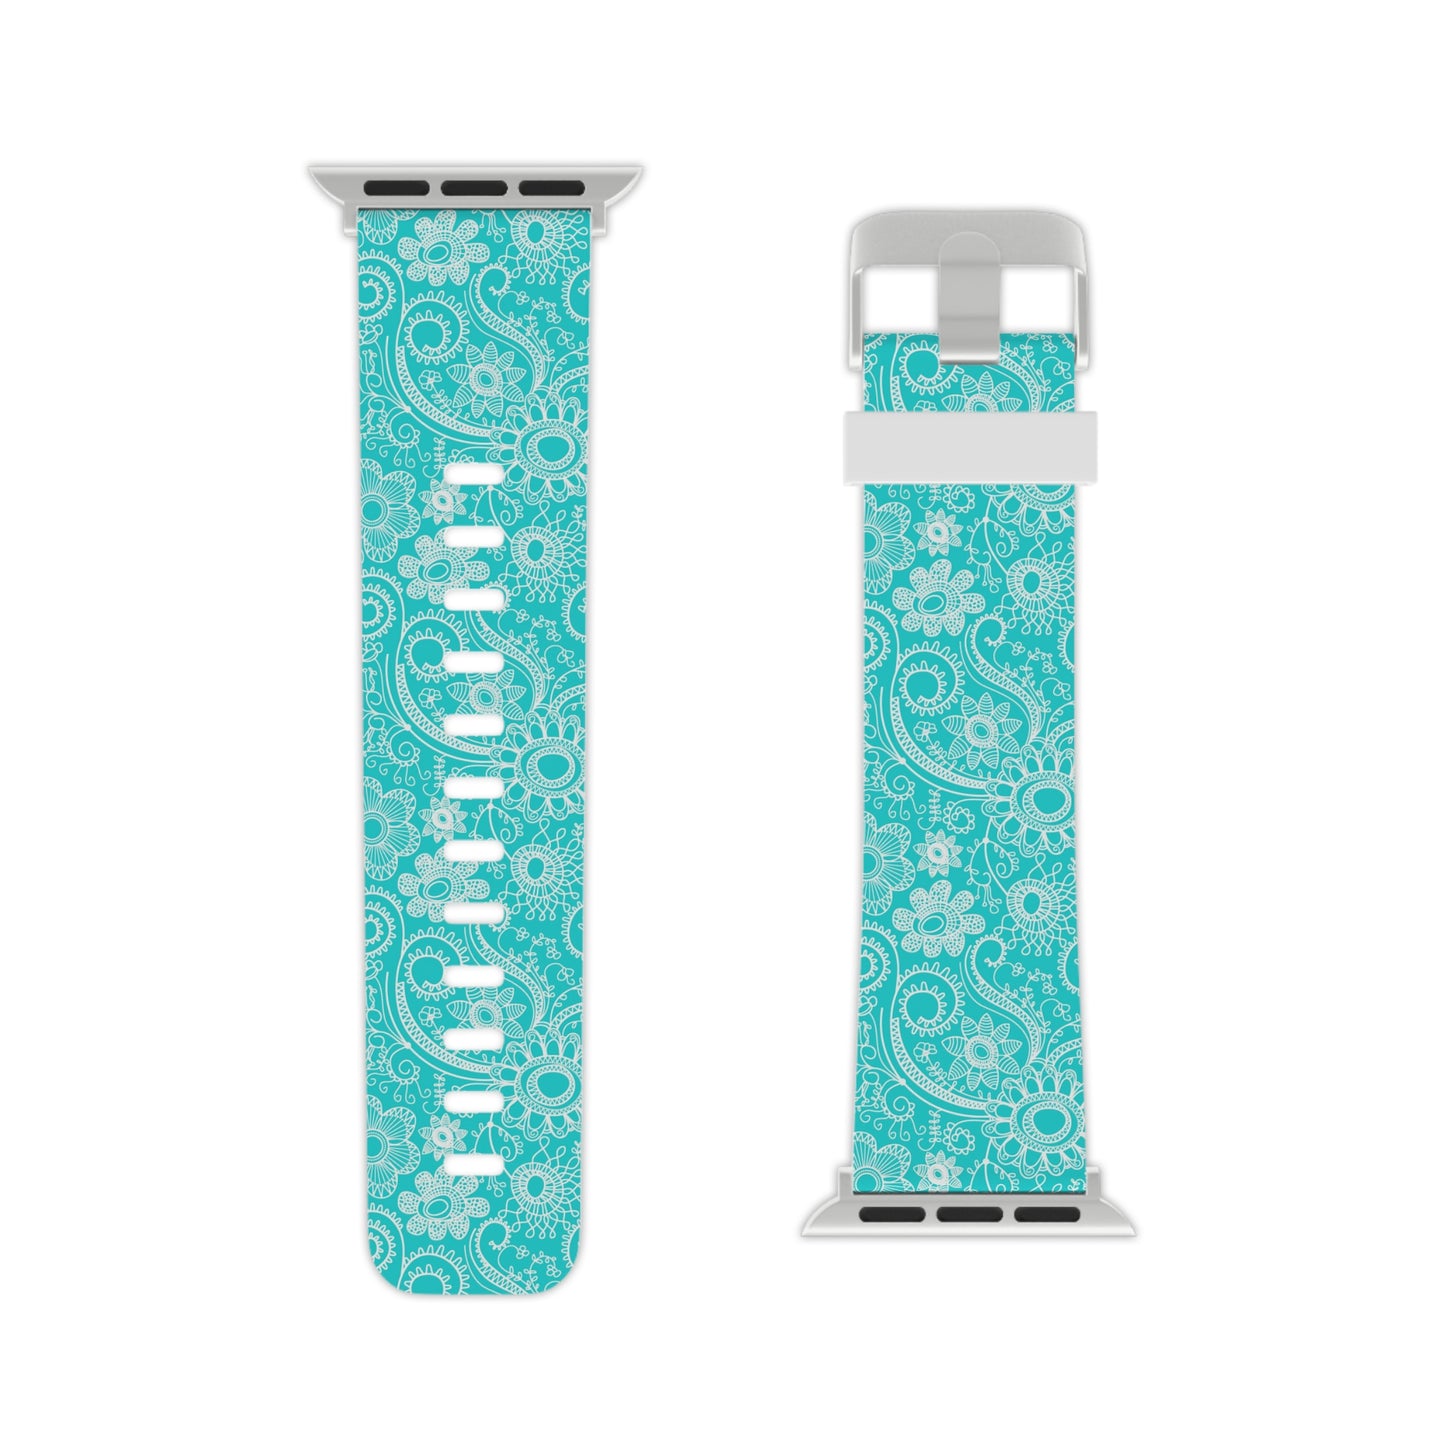 Teal and White Flowers - Watch Band for Apple Watch